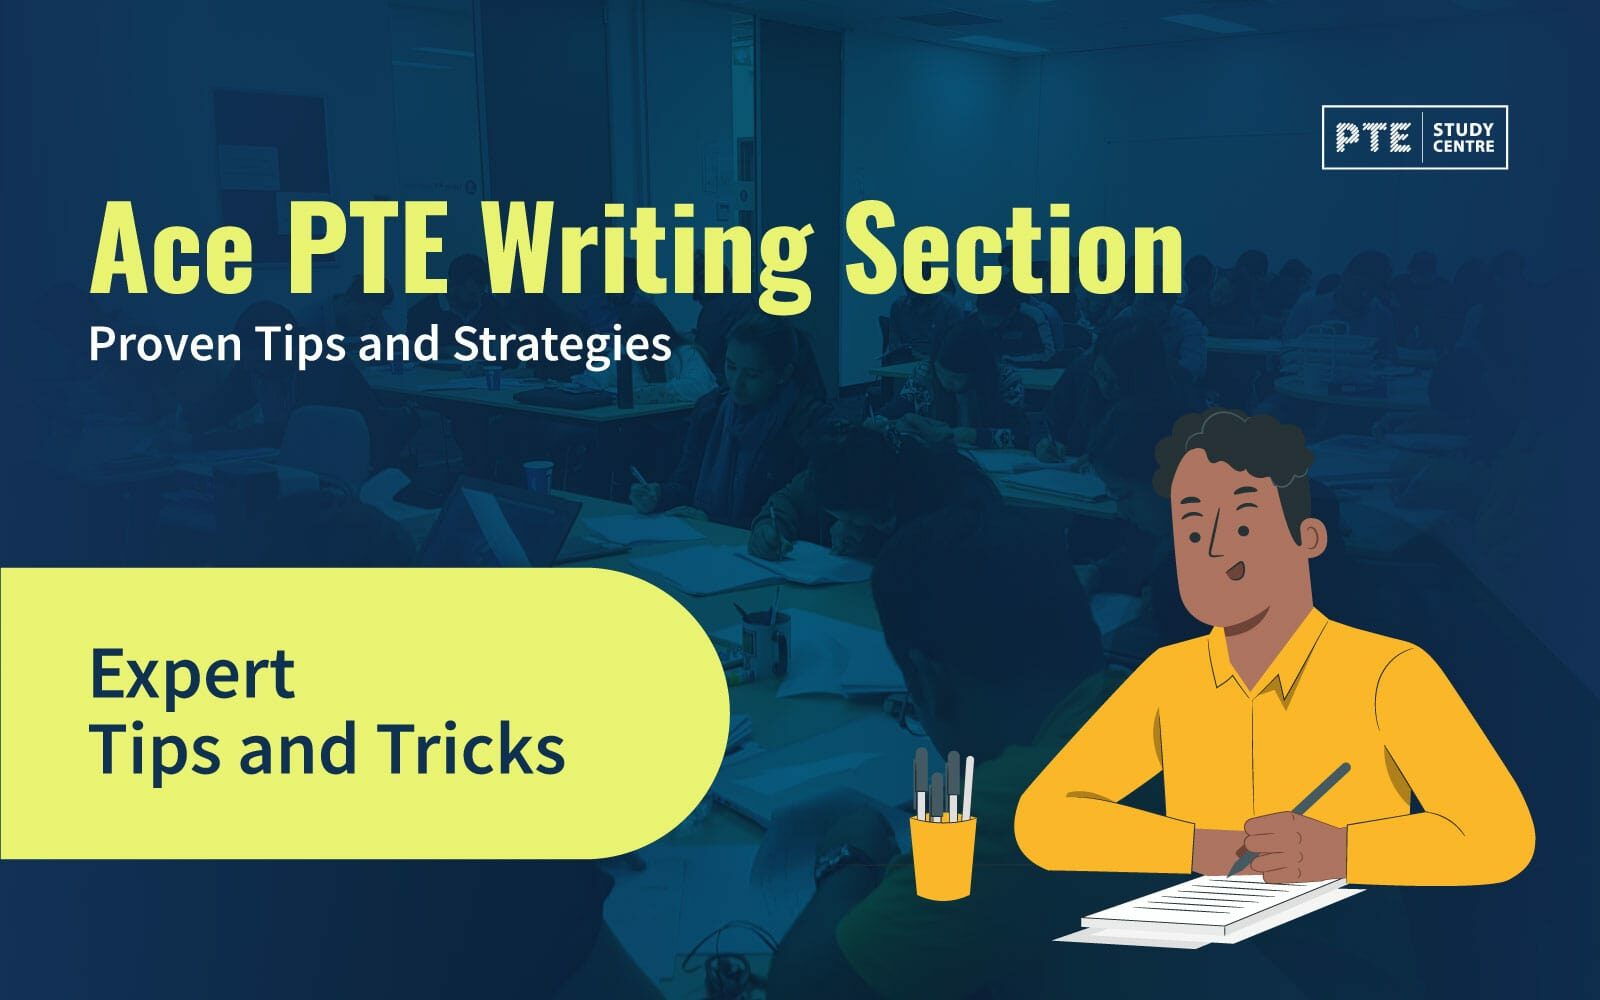 Ace PTE Writing Section: Proven Tips and Strategies